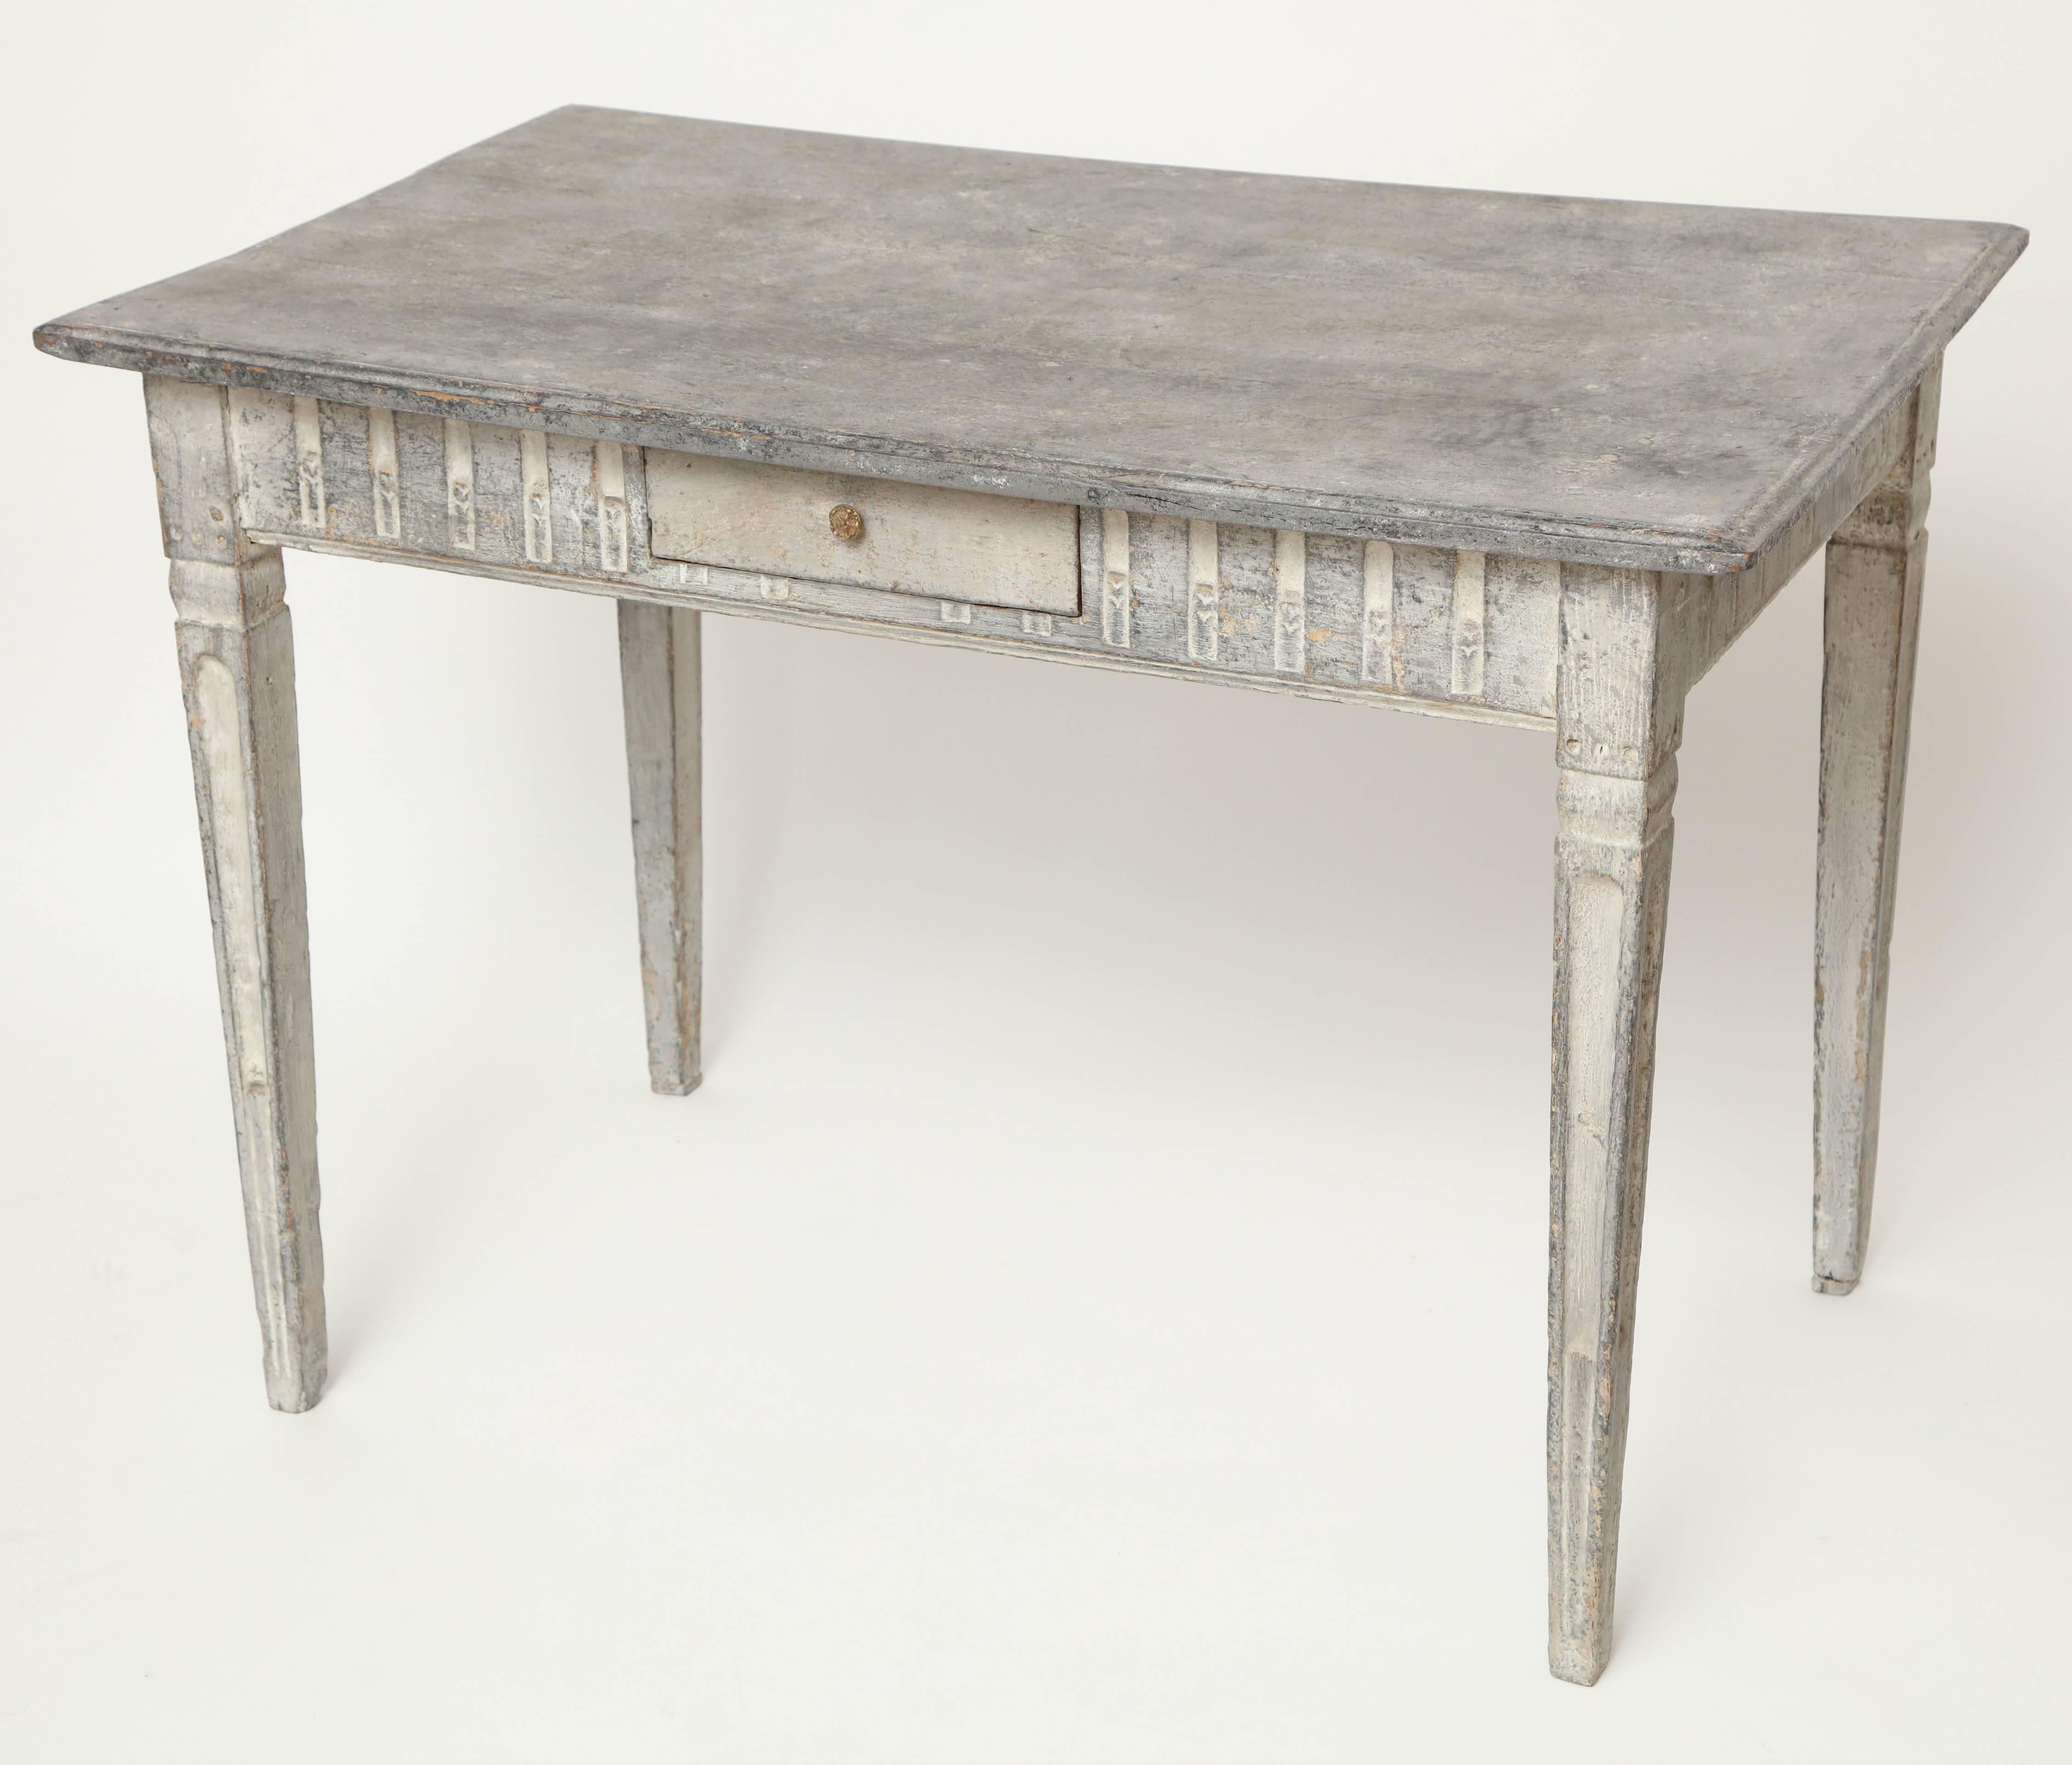 Carved and painted table with single drawer and tapered legs, France, circa 1800